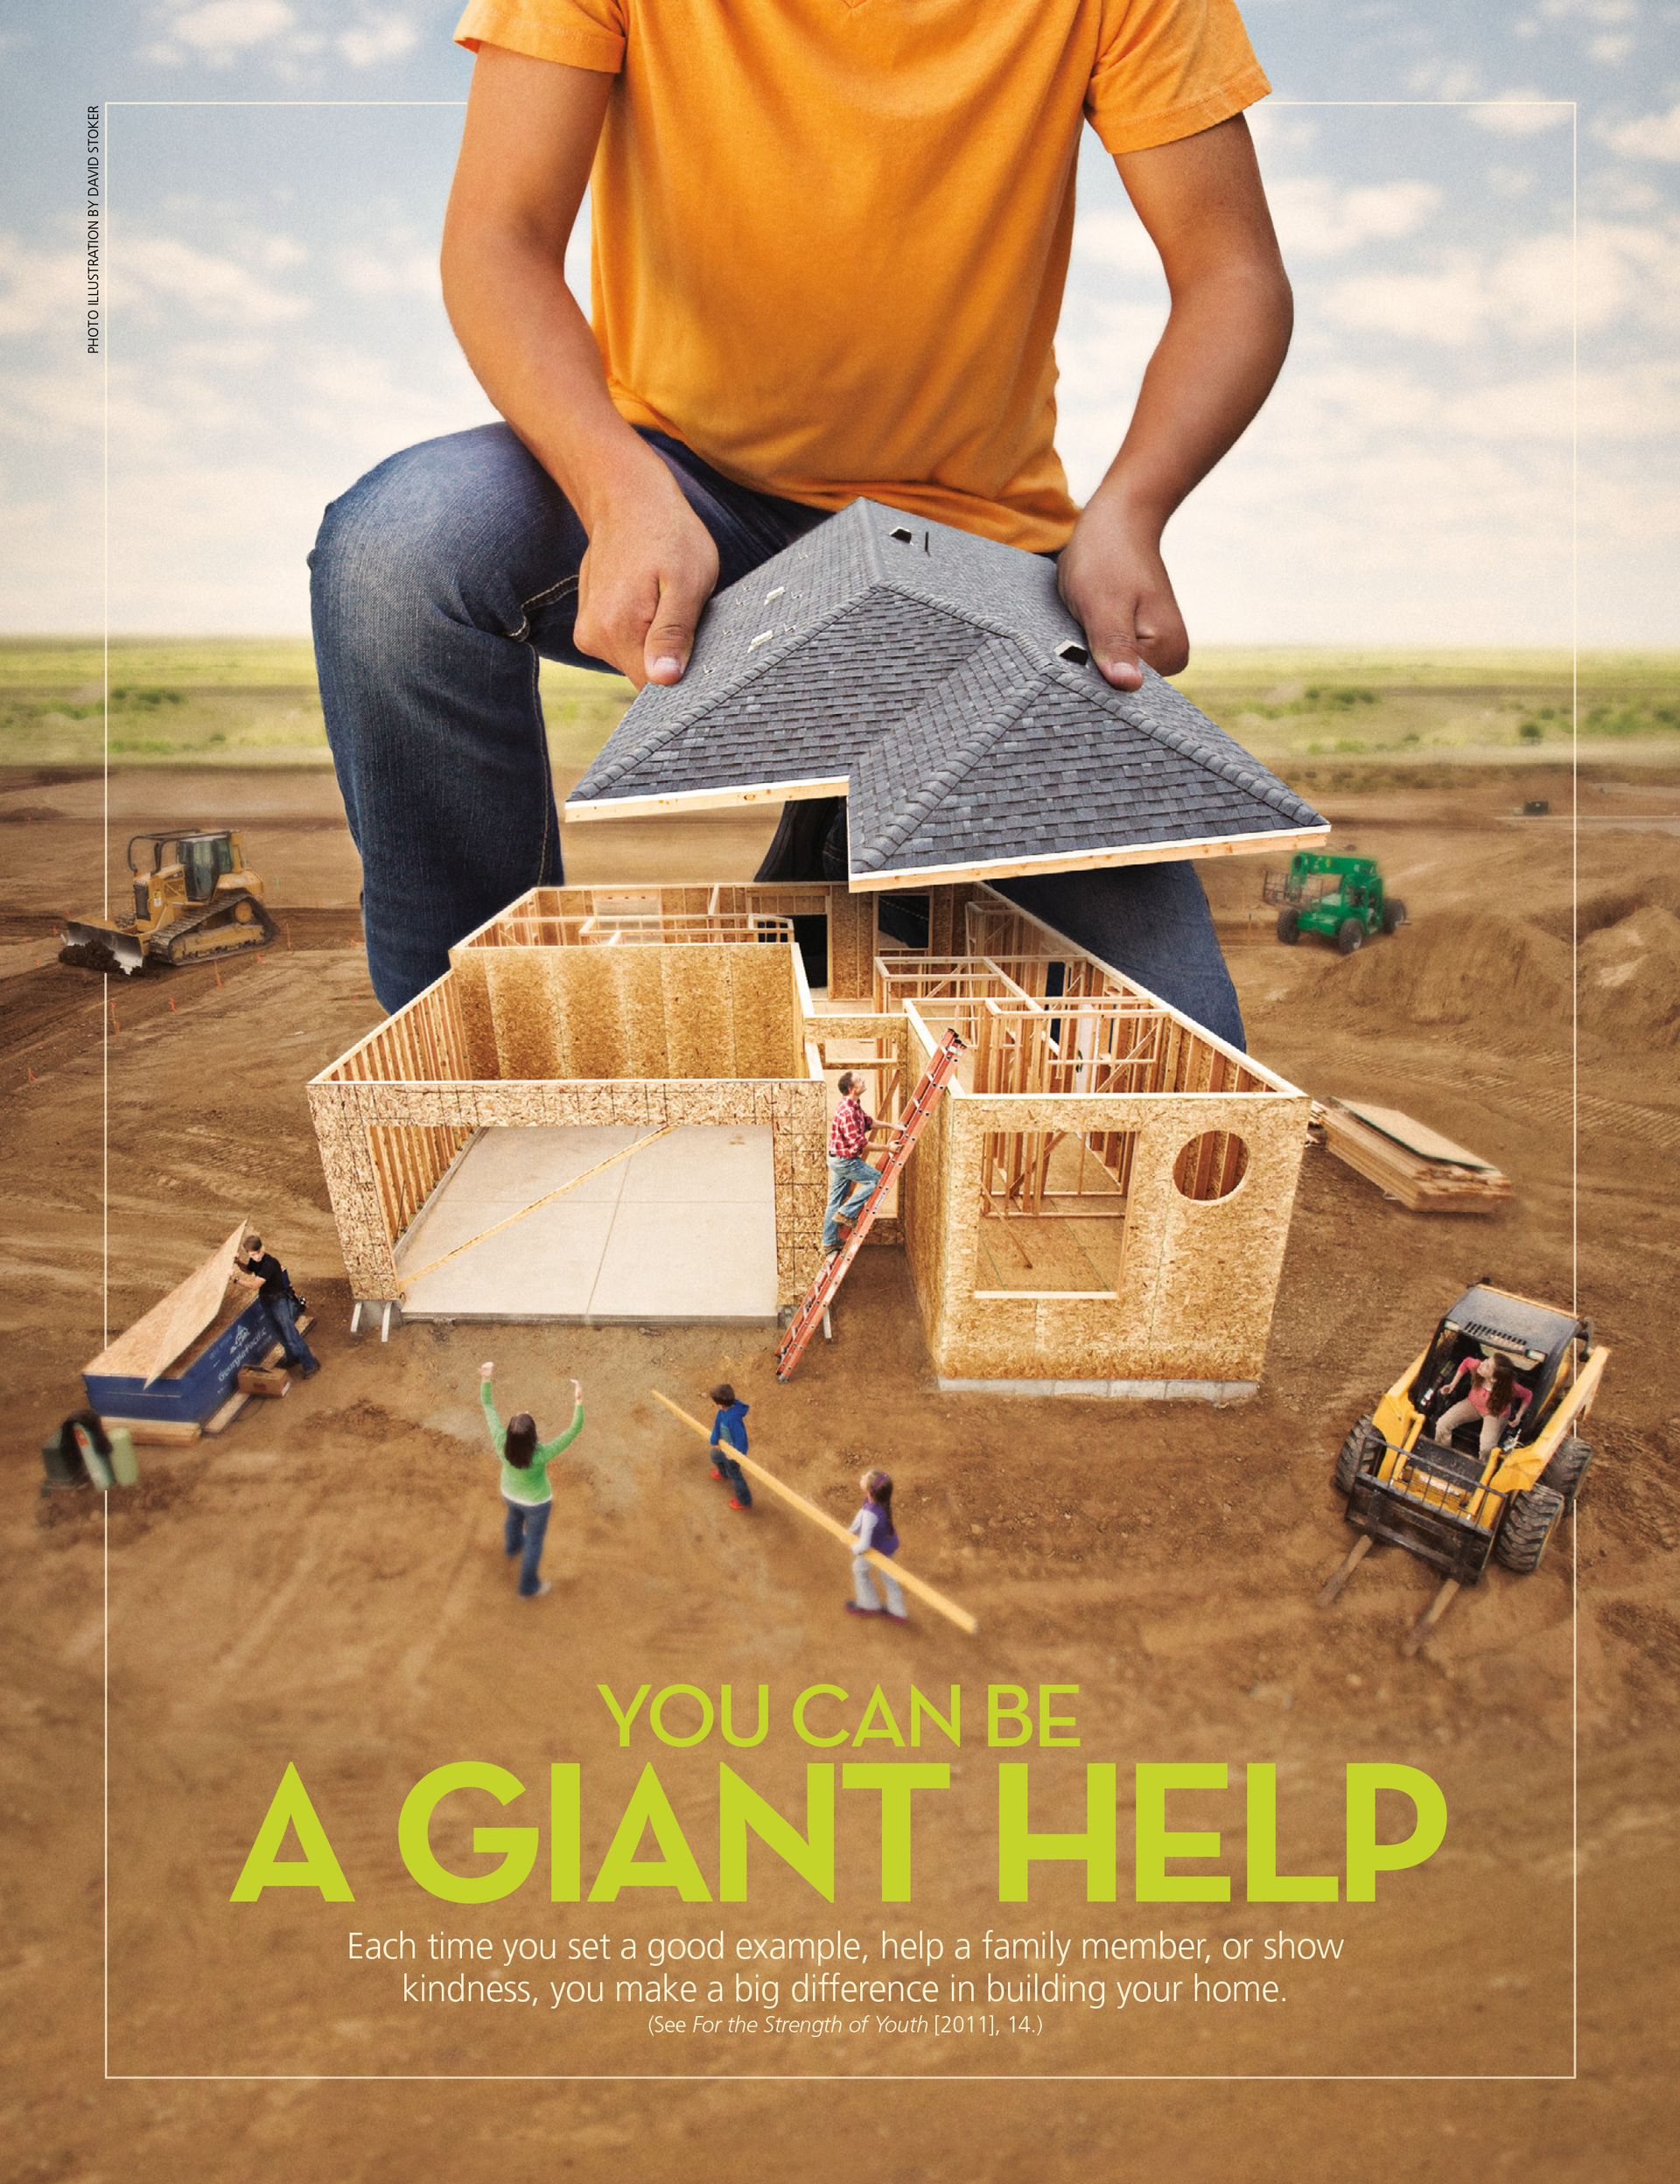 You Can Be A Giant Help. Each time you set a good example, help a family member, or show kindness, you make a big difference in building your home. (See For the Strength of Youth, 2011, 14.) Feb. 2014